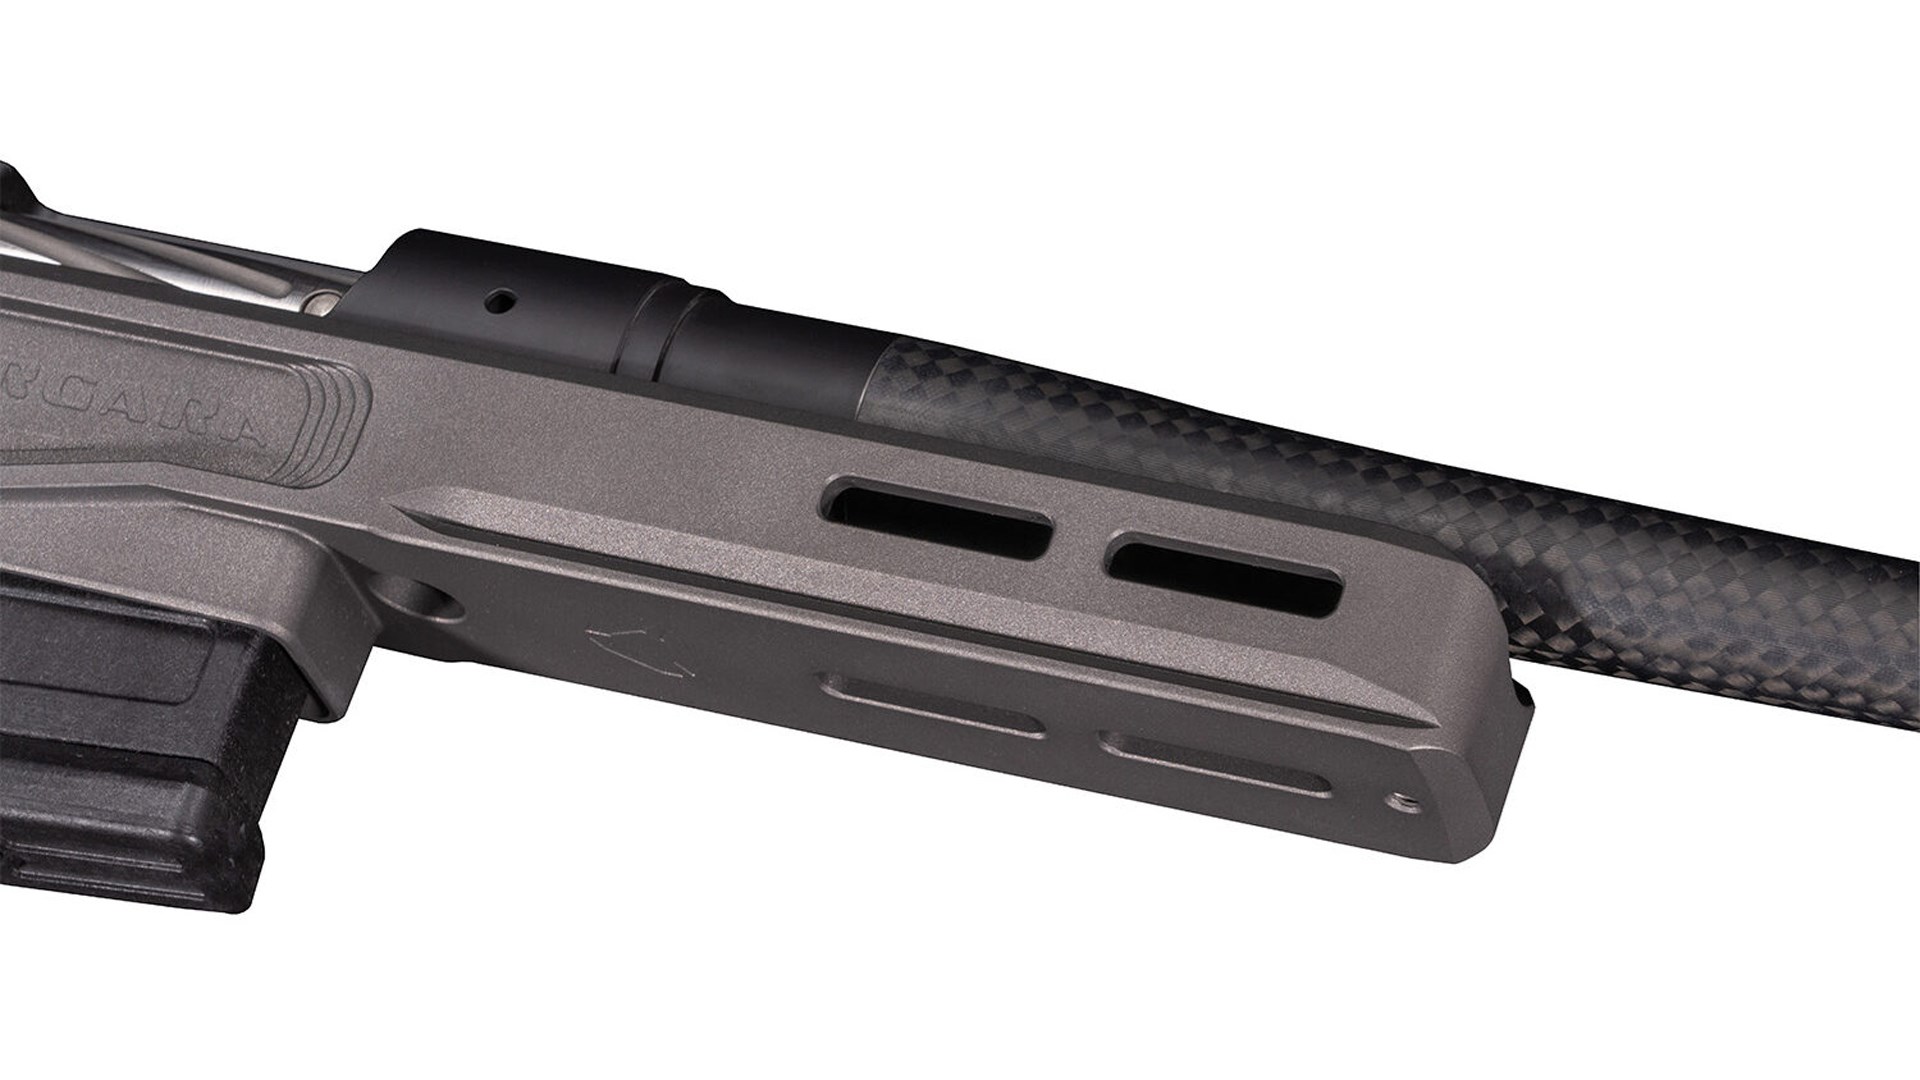 M-Lok attachment slot on the forearm of the Bergara MgMicro Lite rifle.